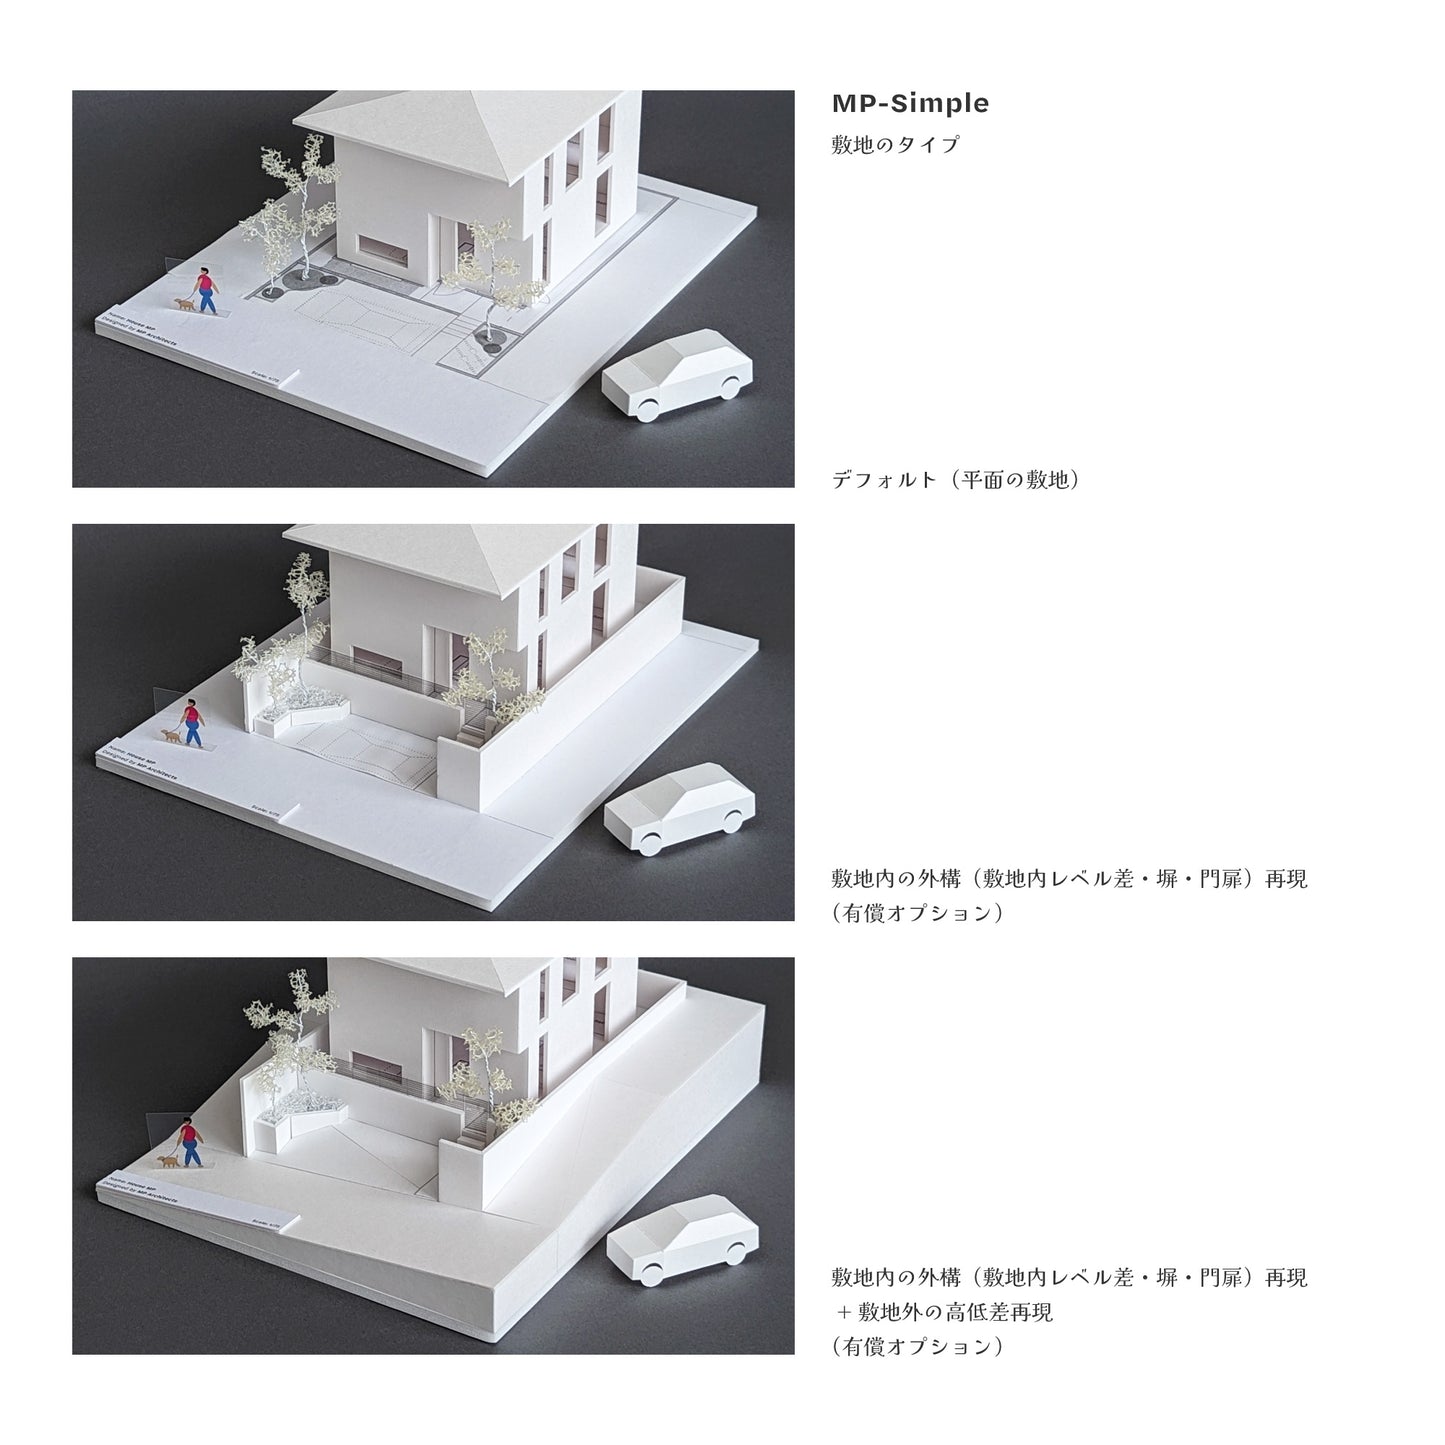 [For sales proposals] Custom-made architectural model: MP Simple